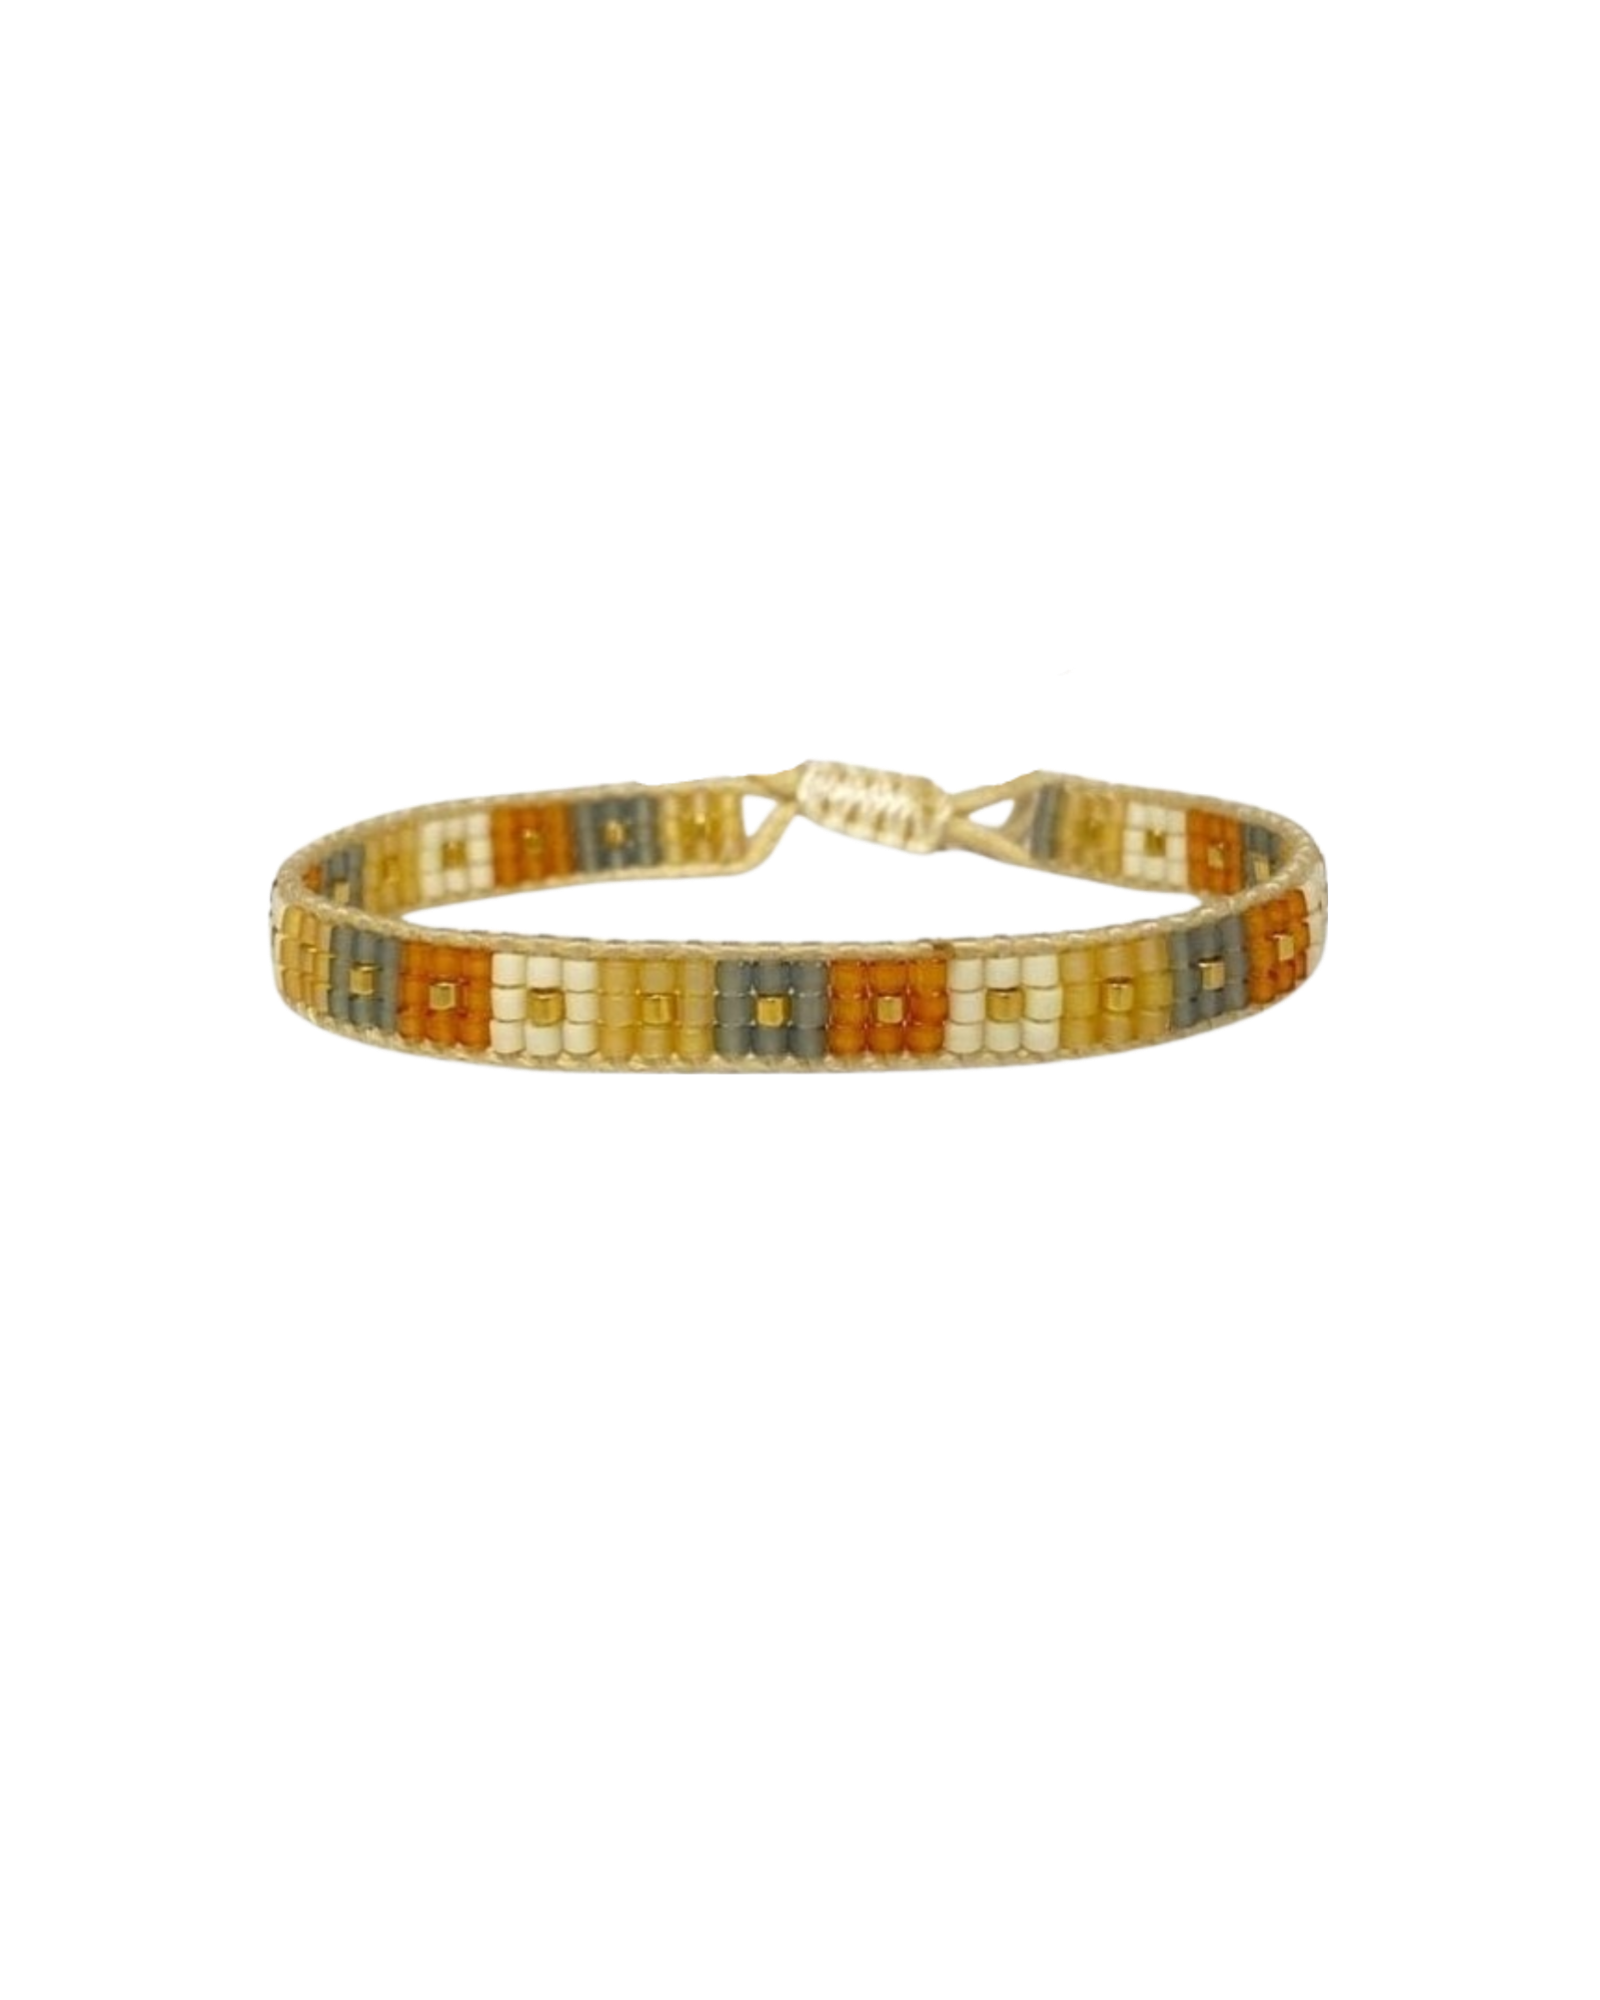 beaded-bracelet with checkered design in nude colors